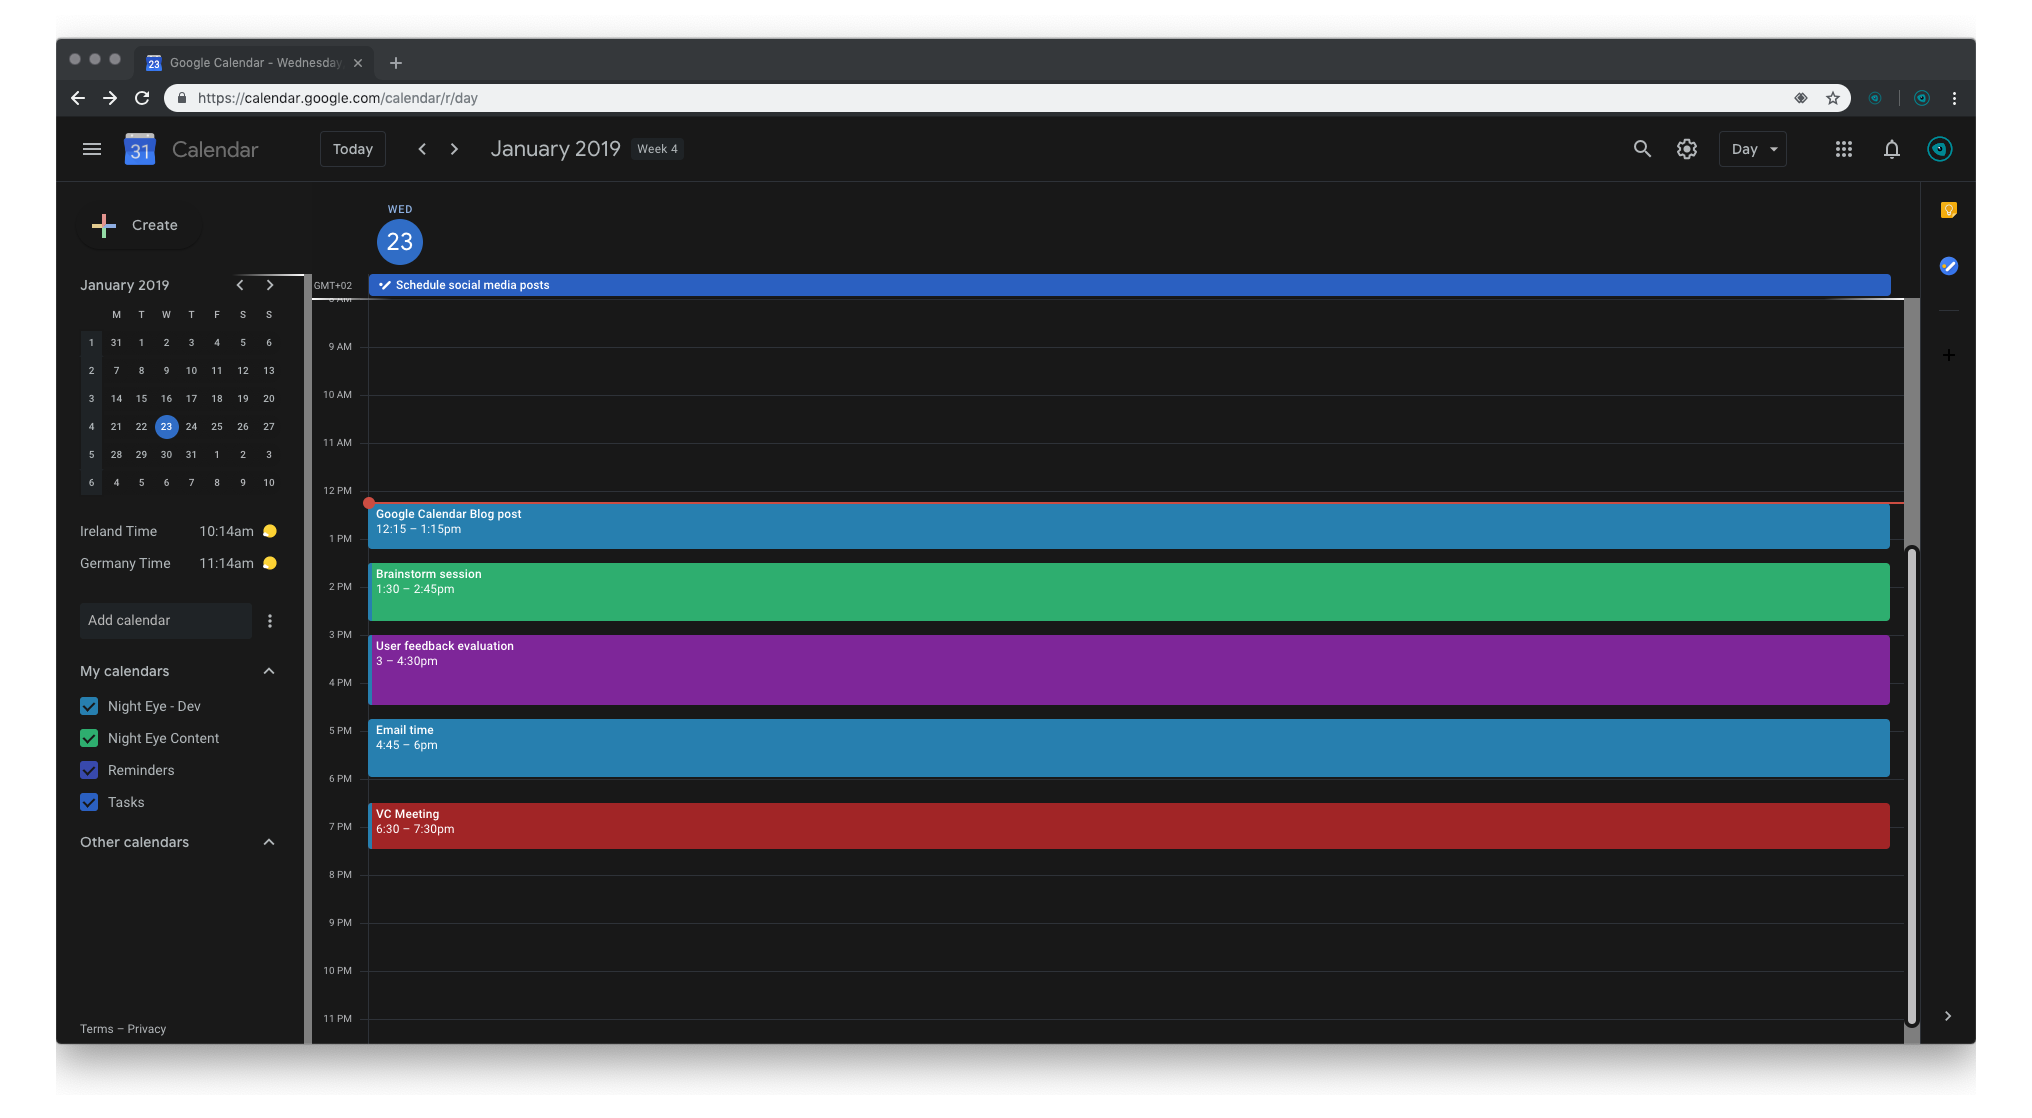 How To Enable Google Calendar Dark Mode (for Web) In 2022